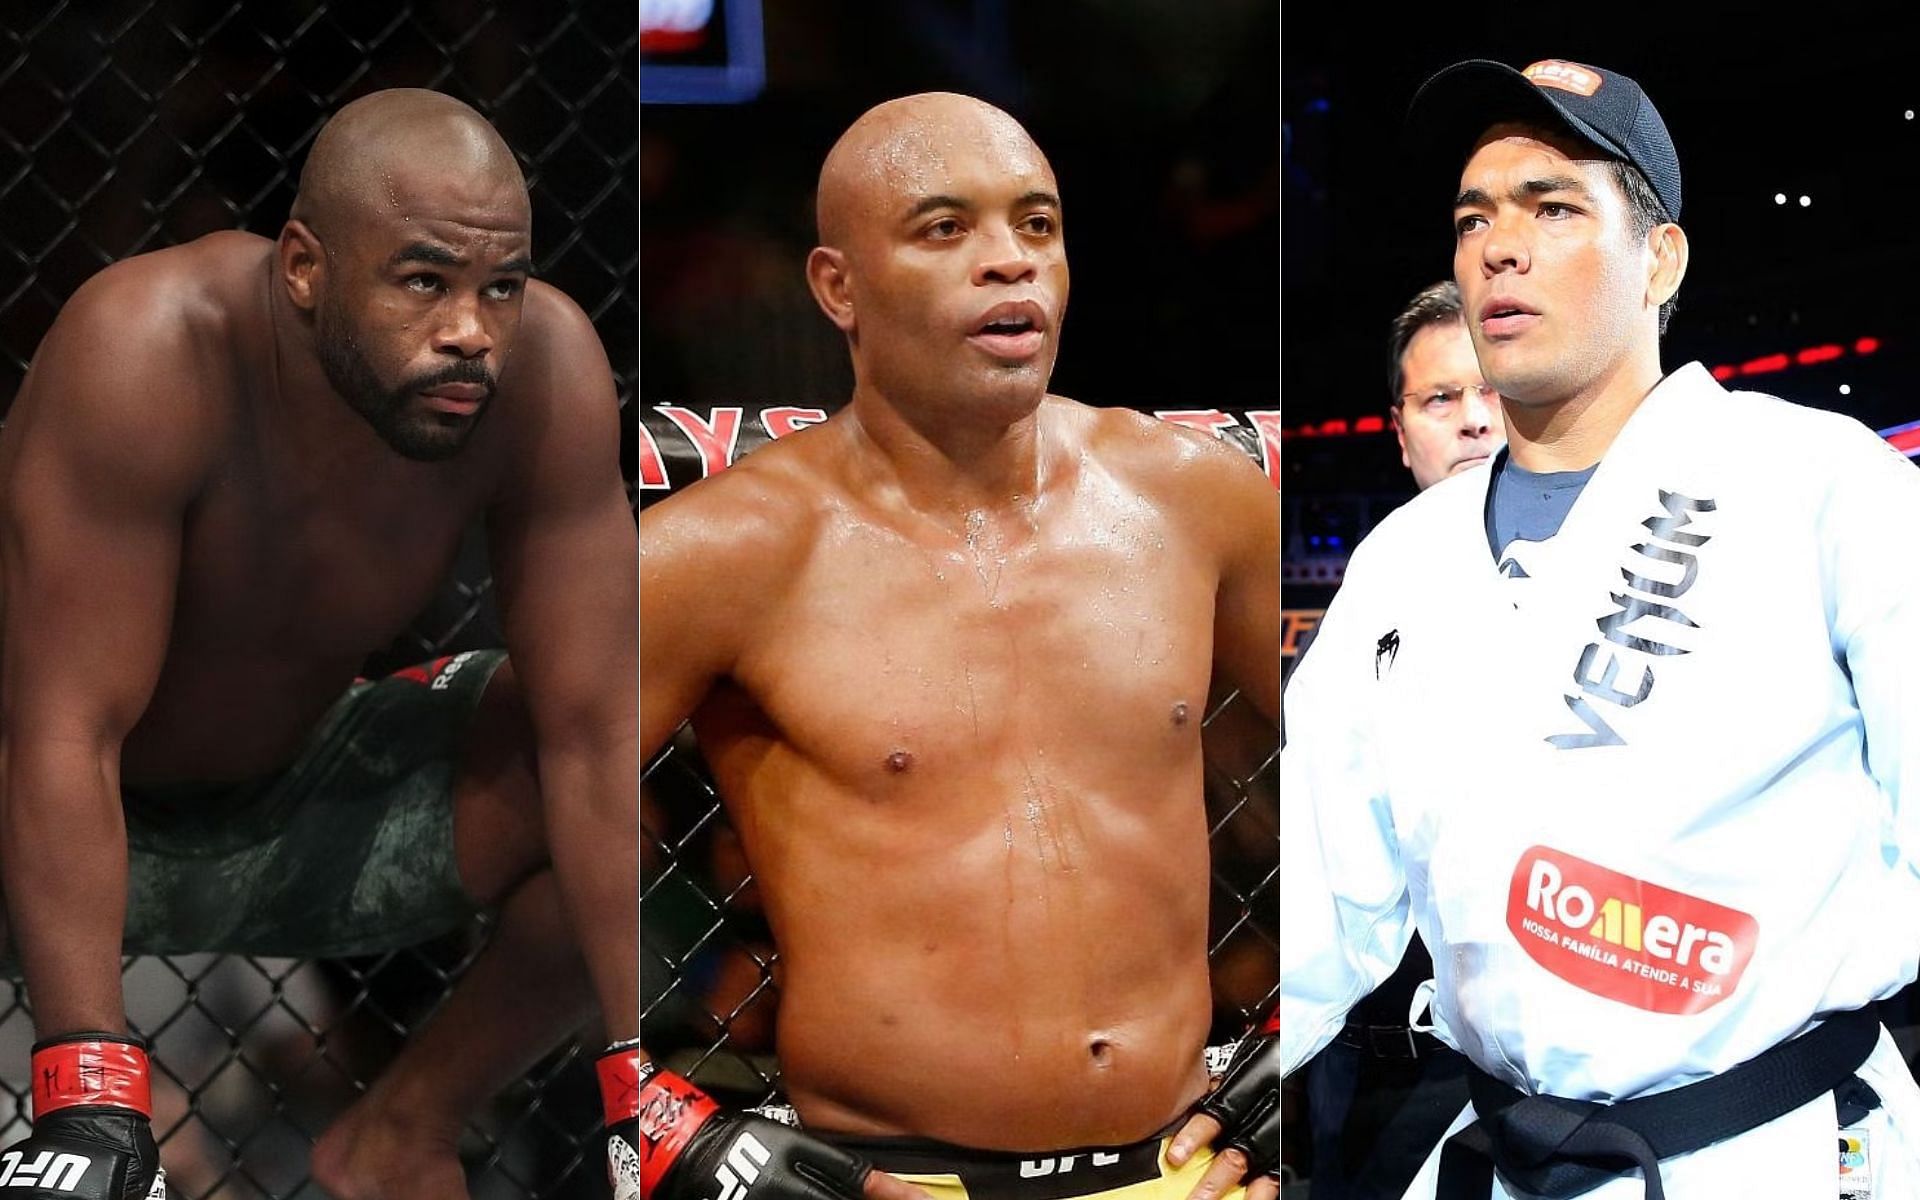 Rashad Evans, Anderson Silva and Lyoto Machida all scored memorable knockouts from 2003 to 2012